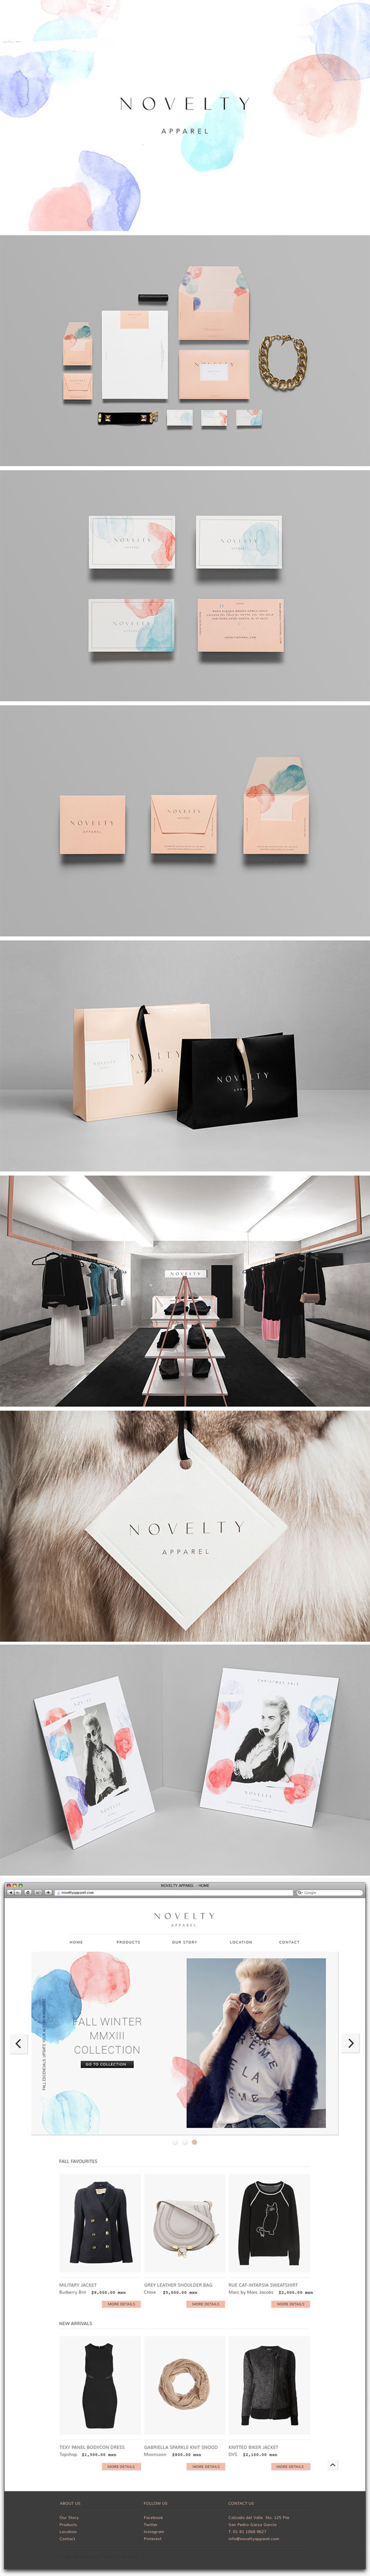 Novelty Boutique branding by Anagrama